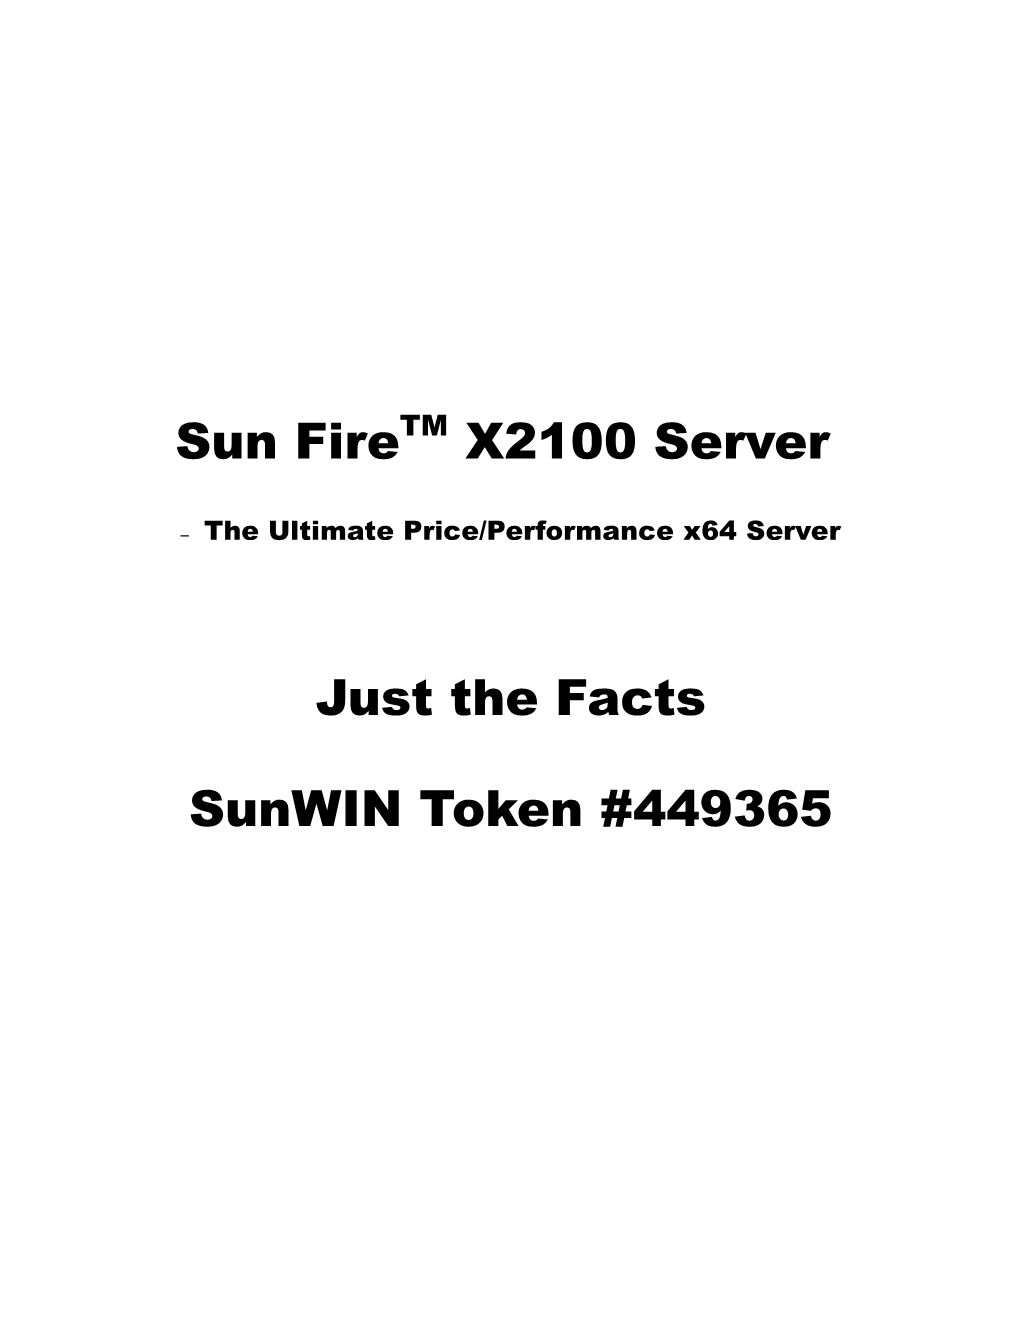 Sun Fire X2100 Server, Just the Facts, March 07, 2006